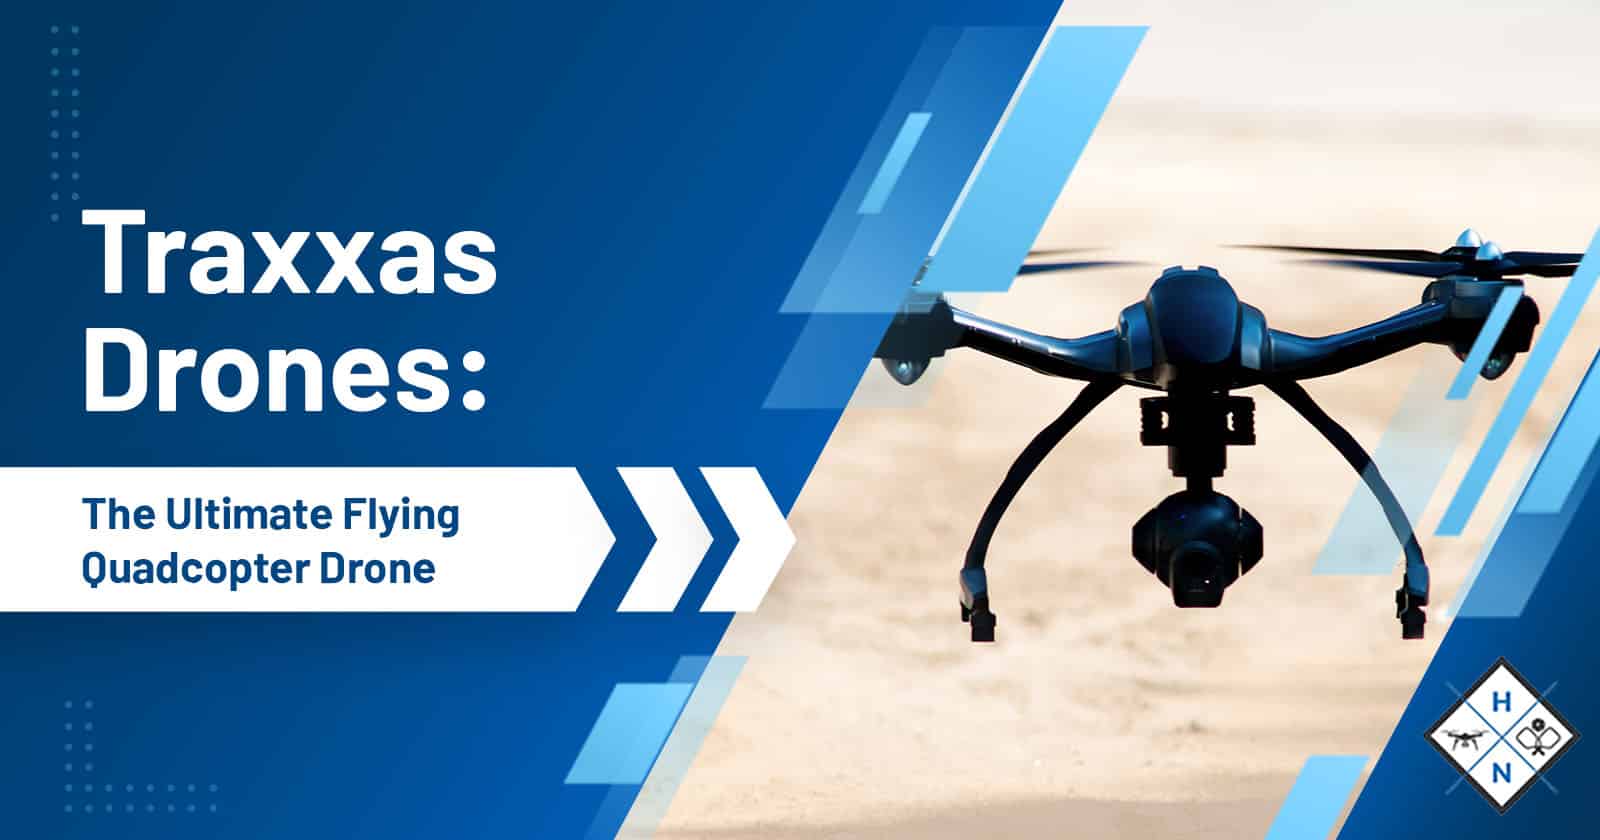 Traxxas Drones: The Ultimate Flying Quadcopter Drone